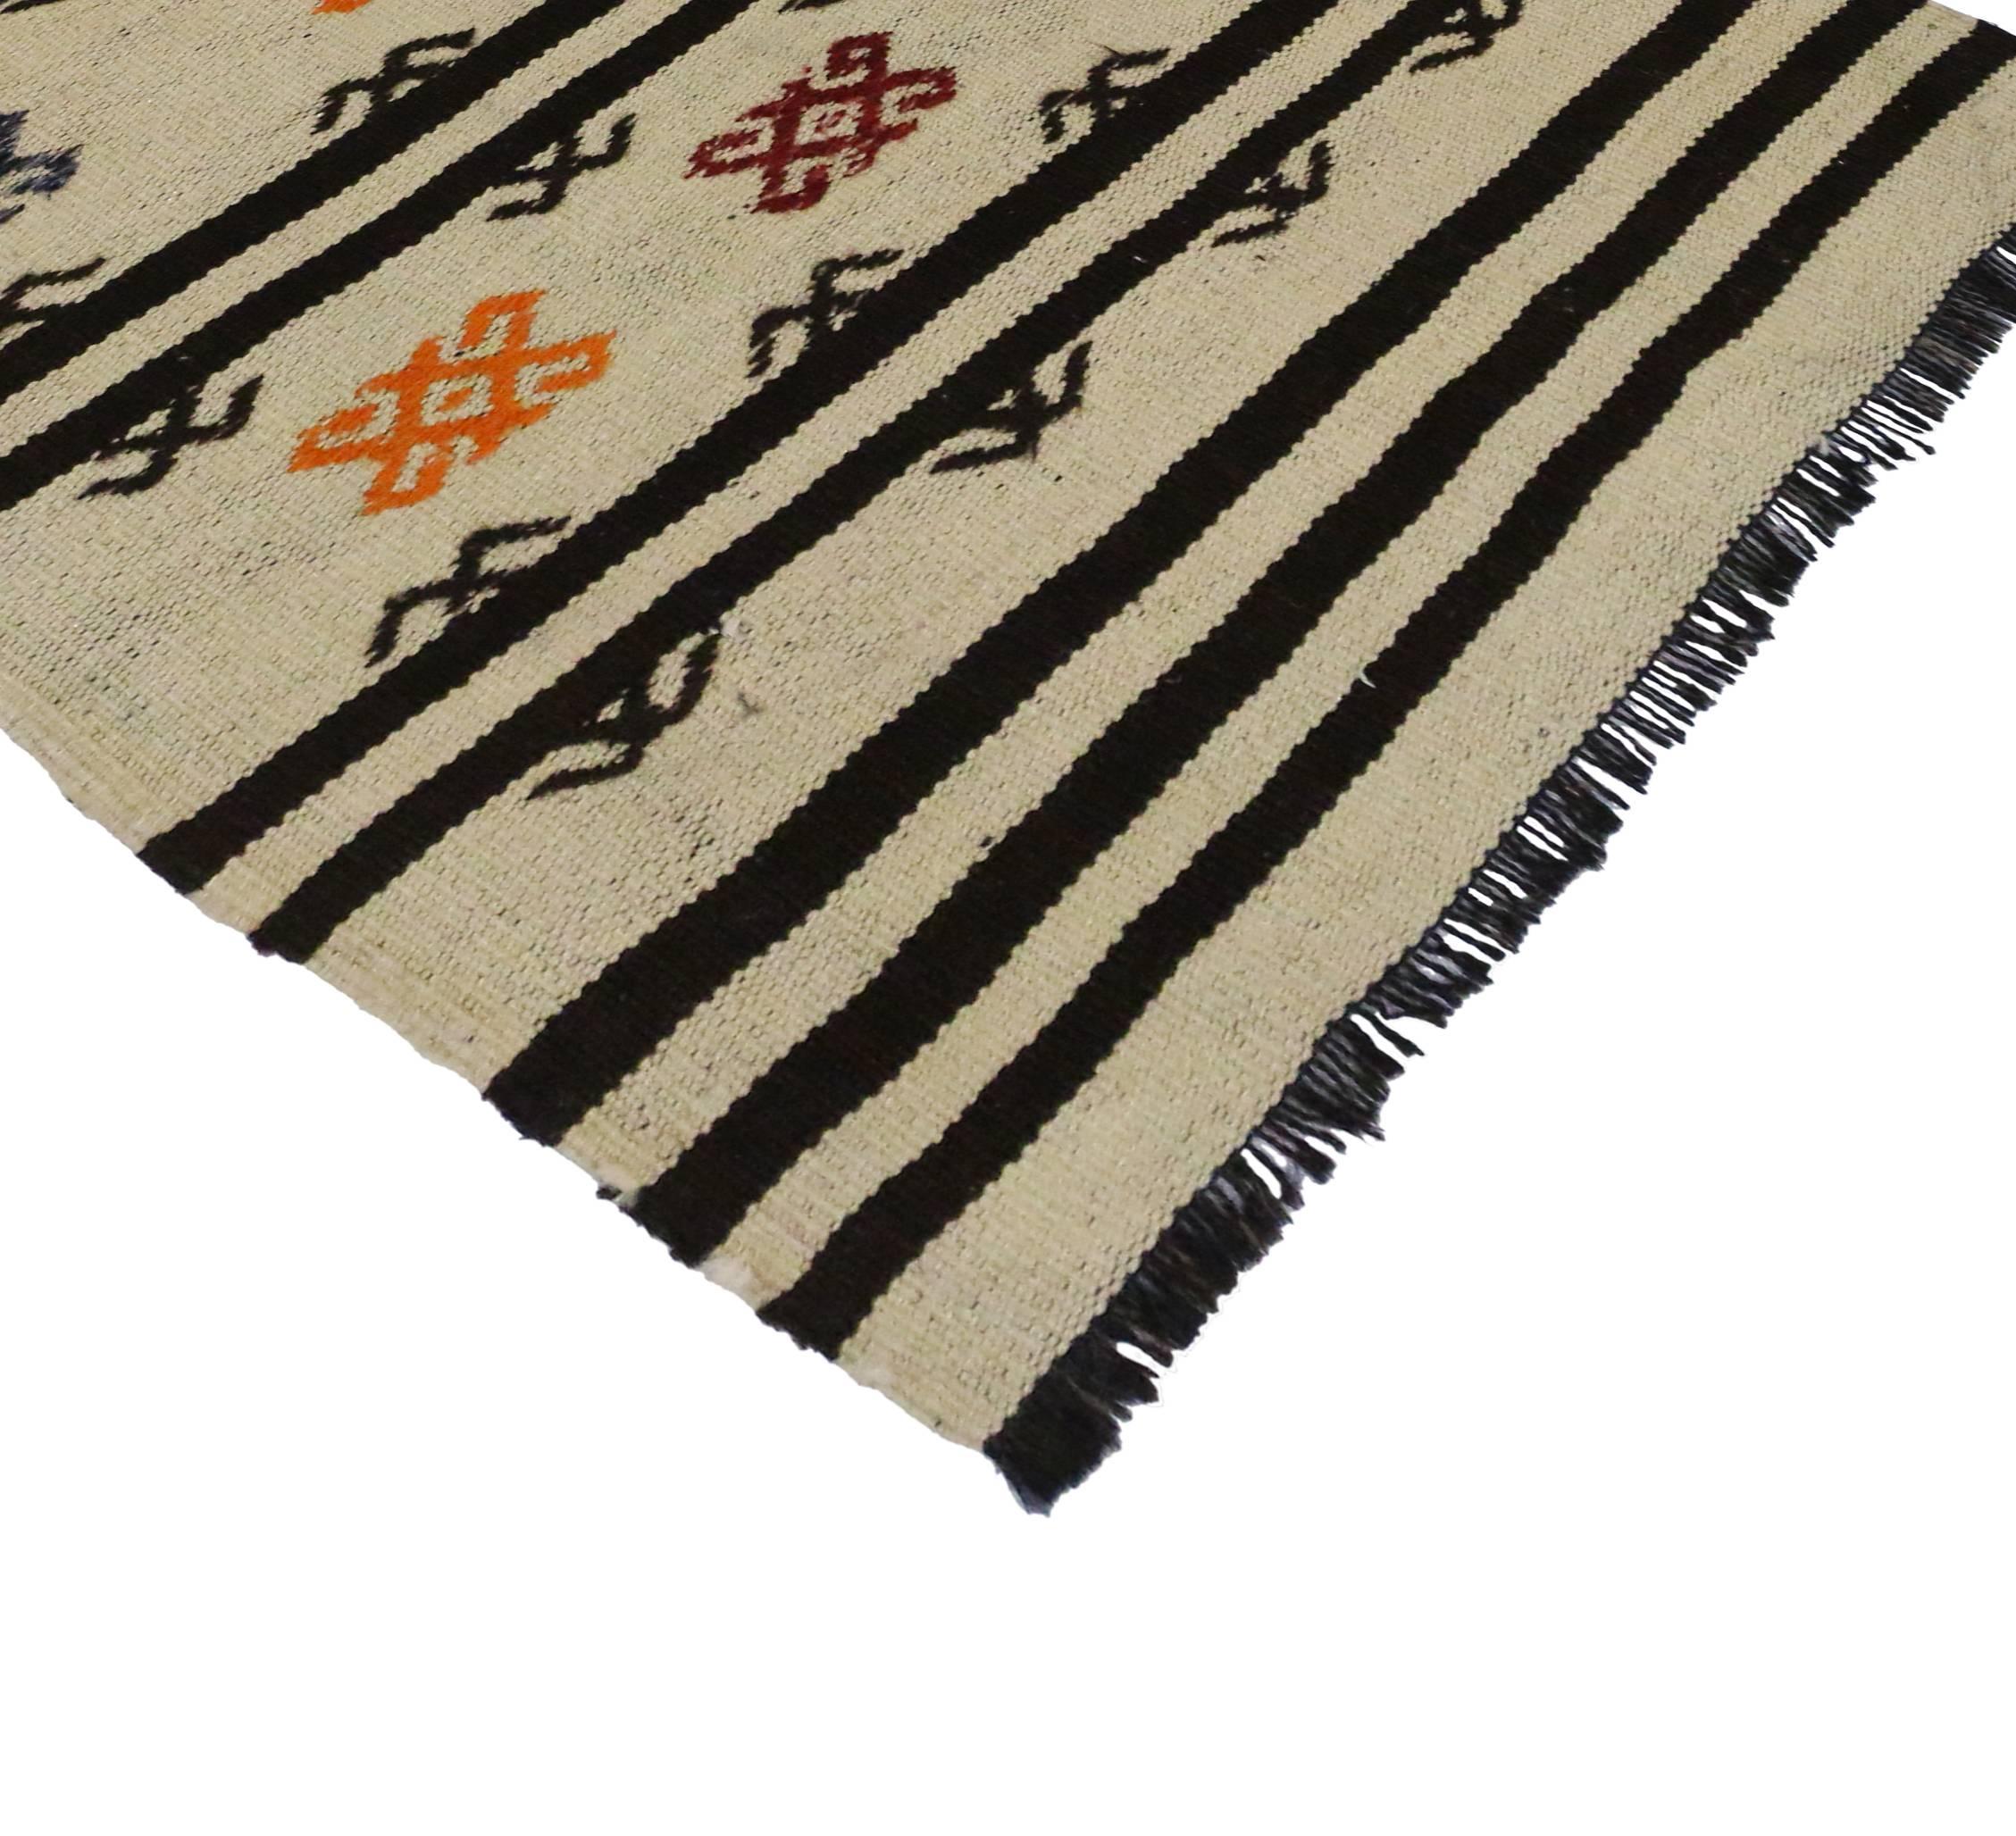 Highlighting the finest trends in design, this Boho chic vintage Turkish Kilim with stripes and modern Tribal style. Features black stripes and color Turkish motifs on a creamy-beige field. A fine example of simplicity and universal appeal, this